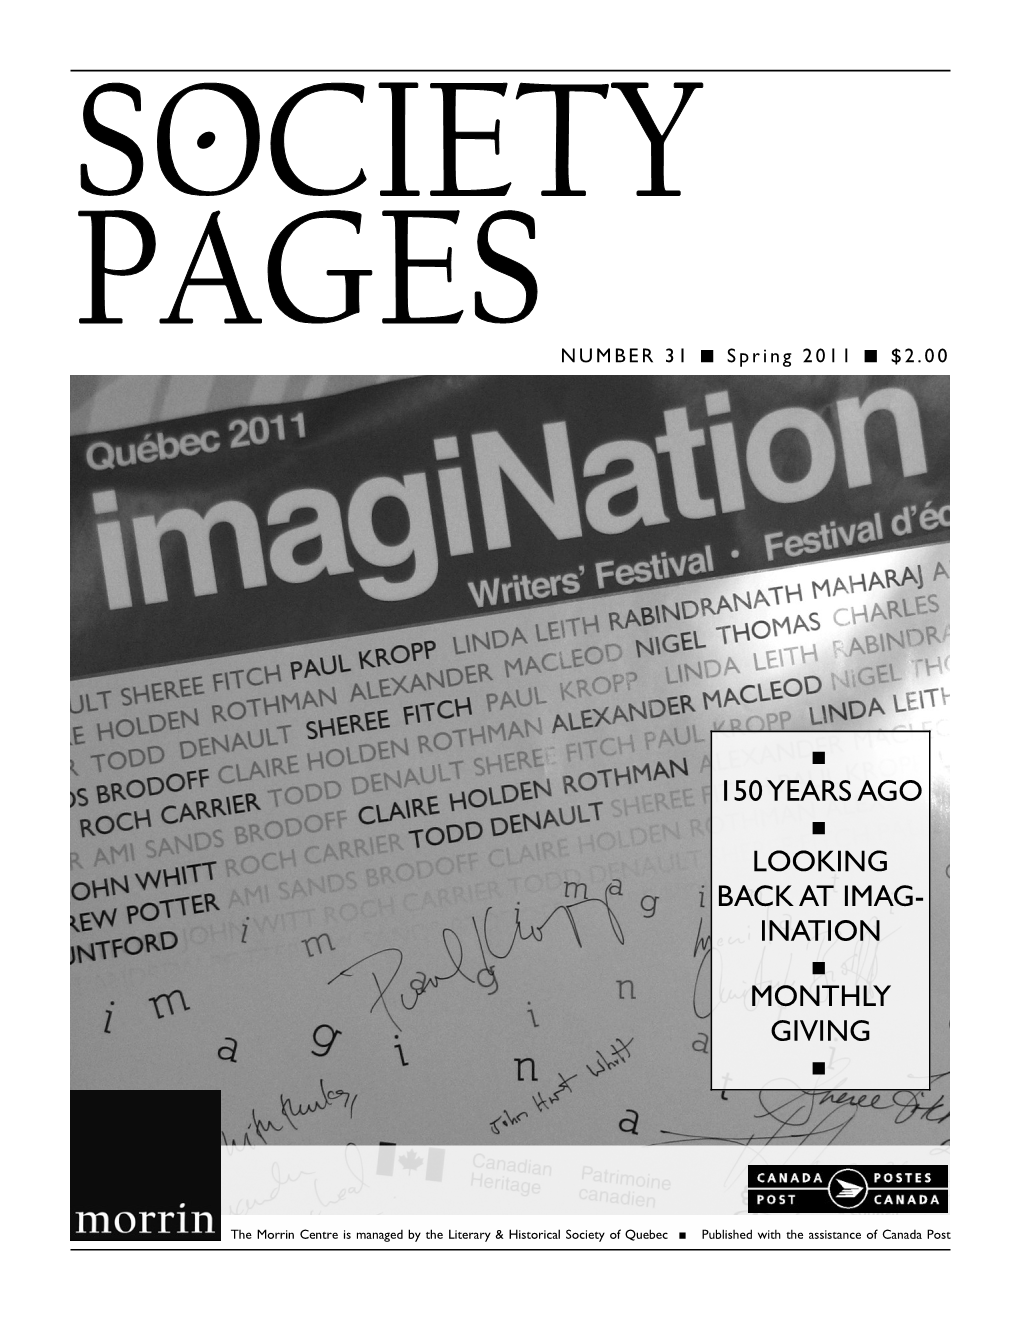 Society Pages from the Executive Director